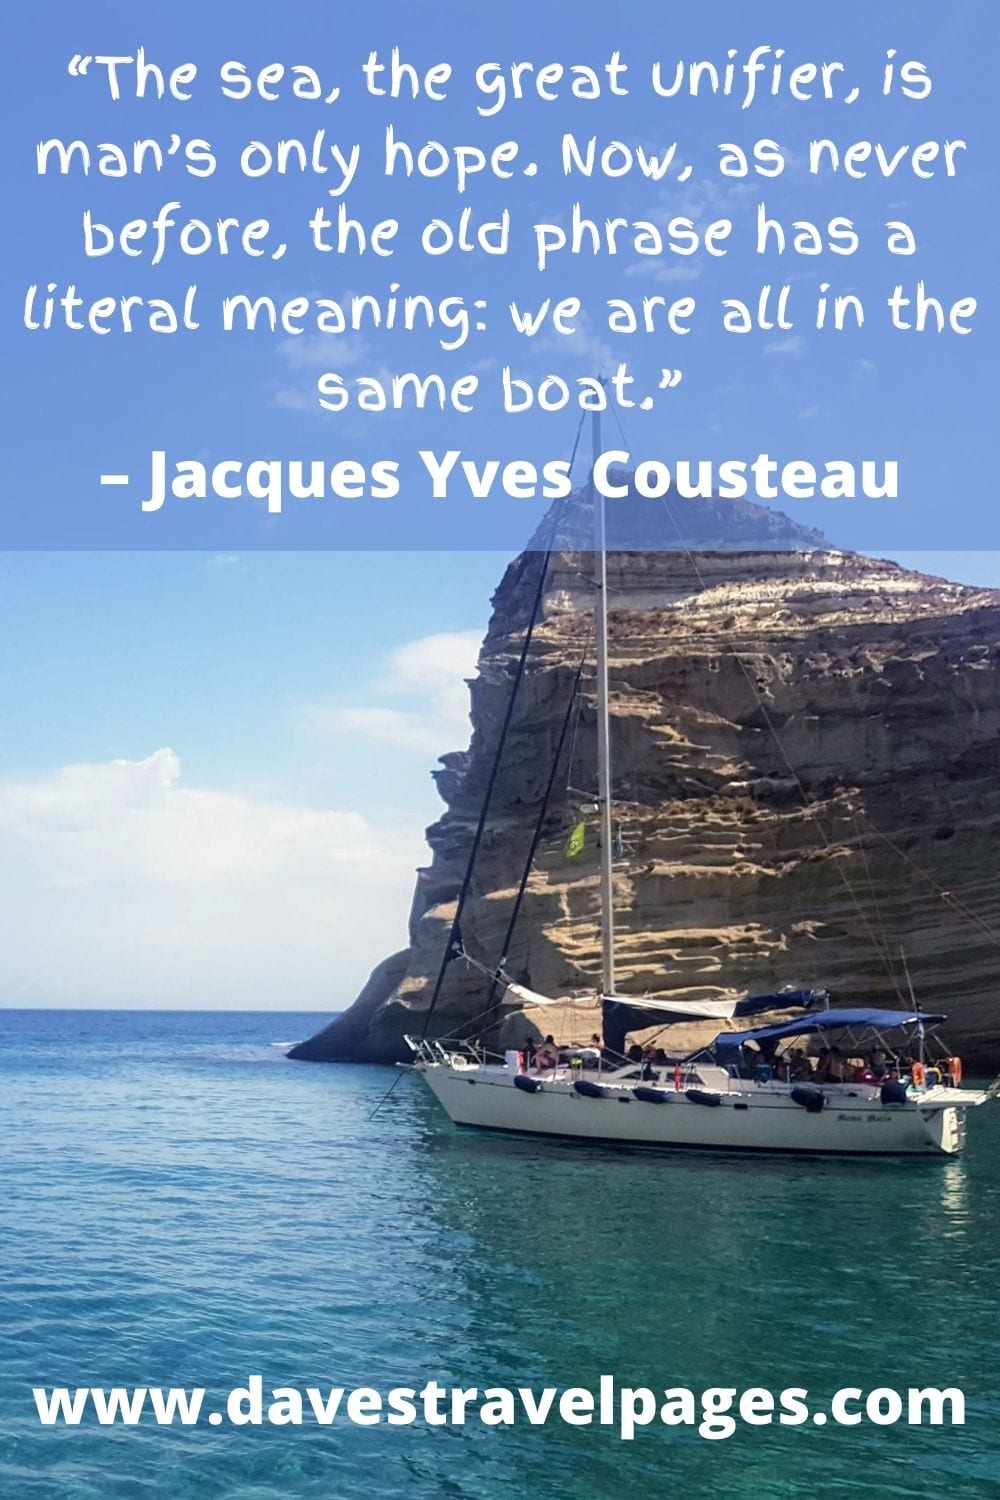 “The sea, the great unifier, is man’s only hope. Now, as never before, the old phrase has a literal meaning: we are all in the same boat.” – Jacques Yves Cousteau